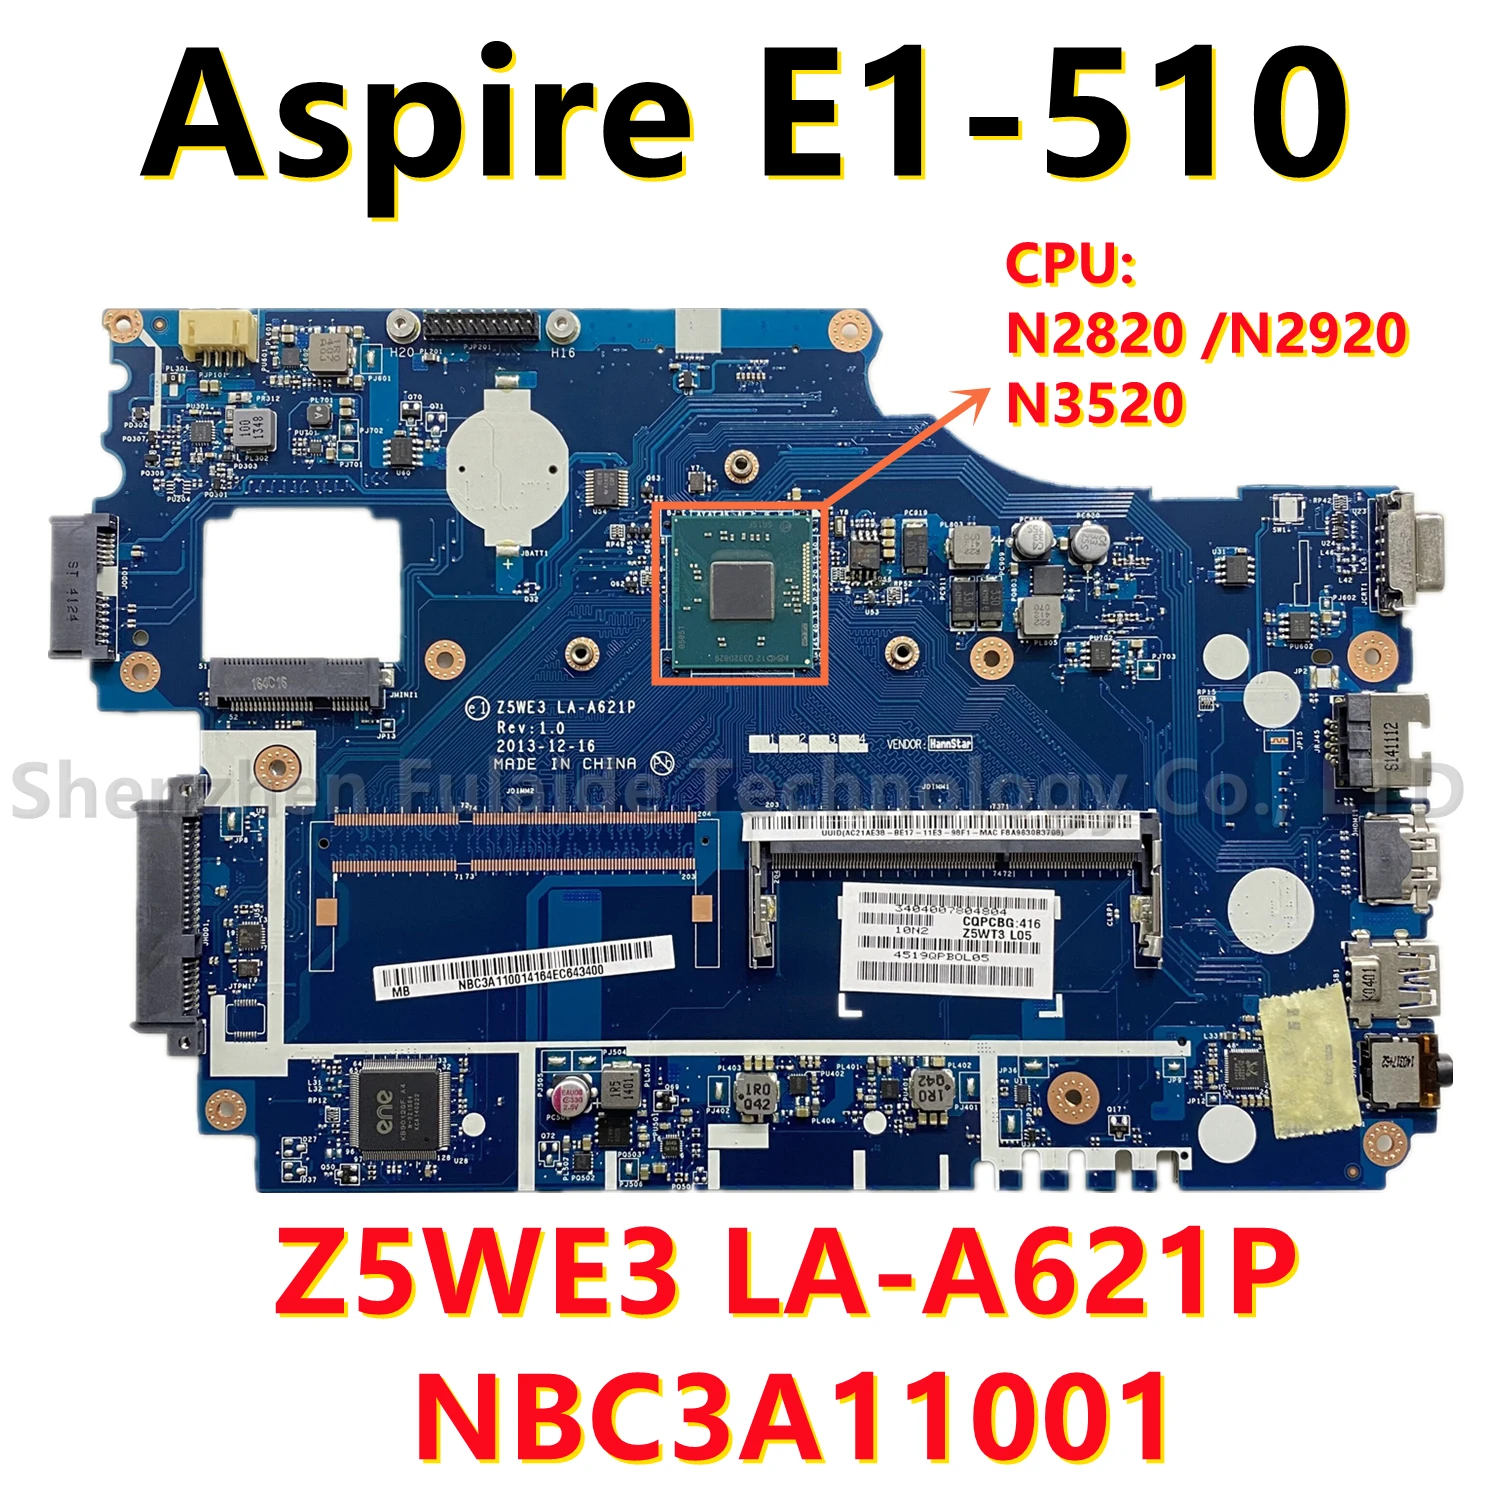 Z5WE3 LA-A621P for Acer Aspire E1-510 laptop Mainboard CORE N2820 N2920 N3520 CPU NBC3911001 Motherboard full tested